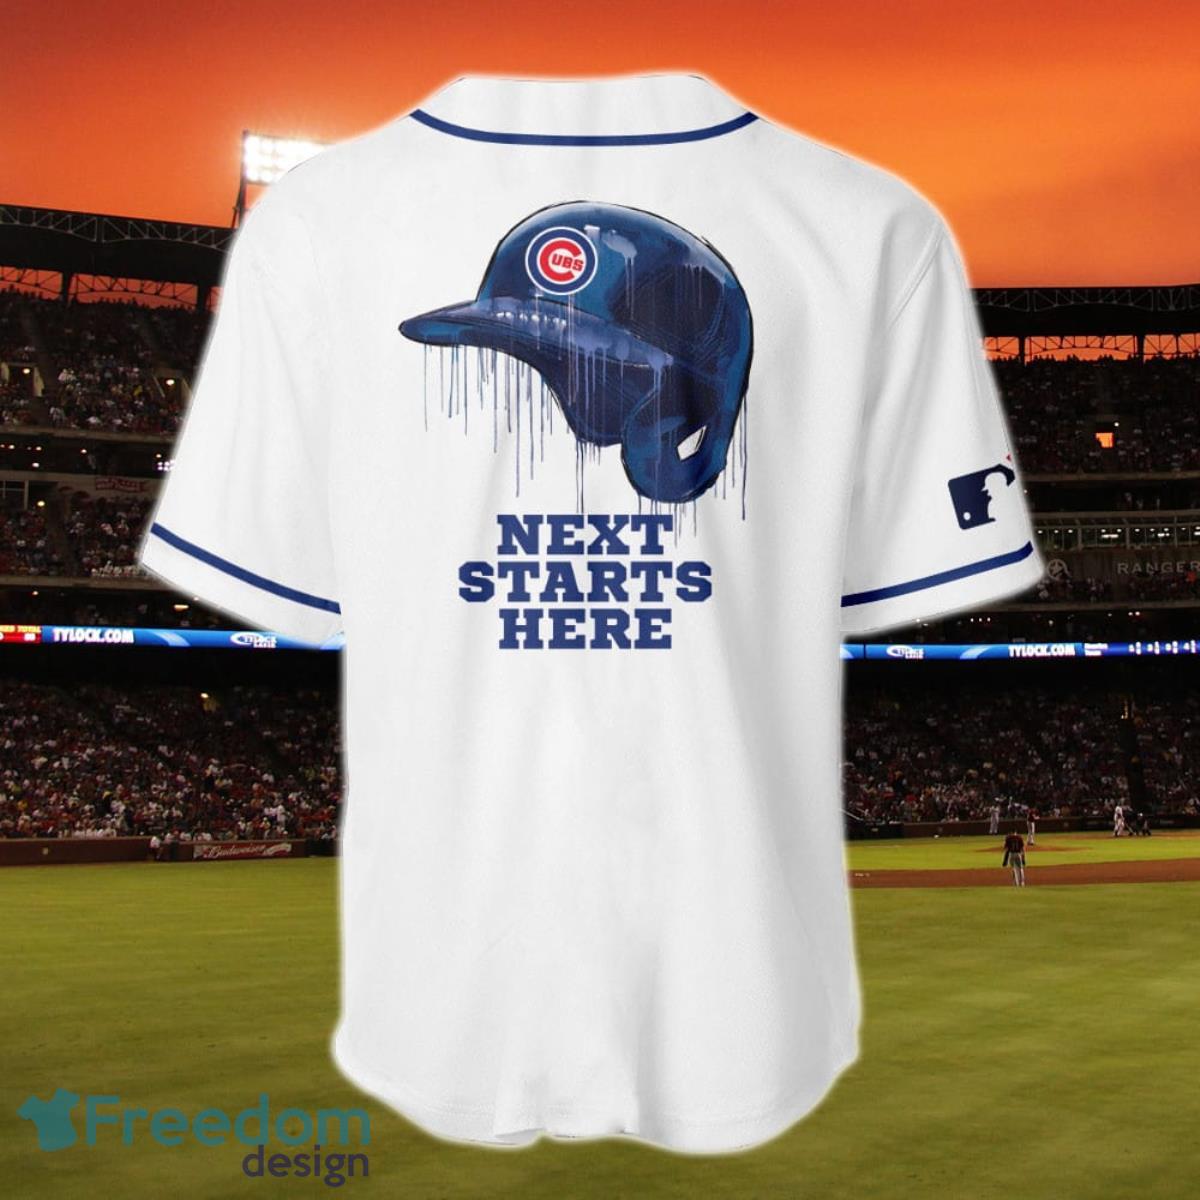 Chicago Cubs MLB Baseball Jersey Shirt Custom Name And Number For Fans